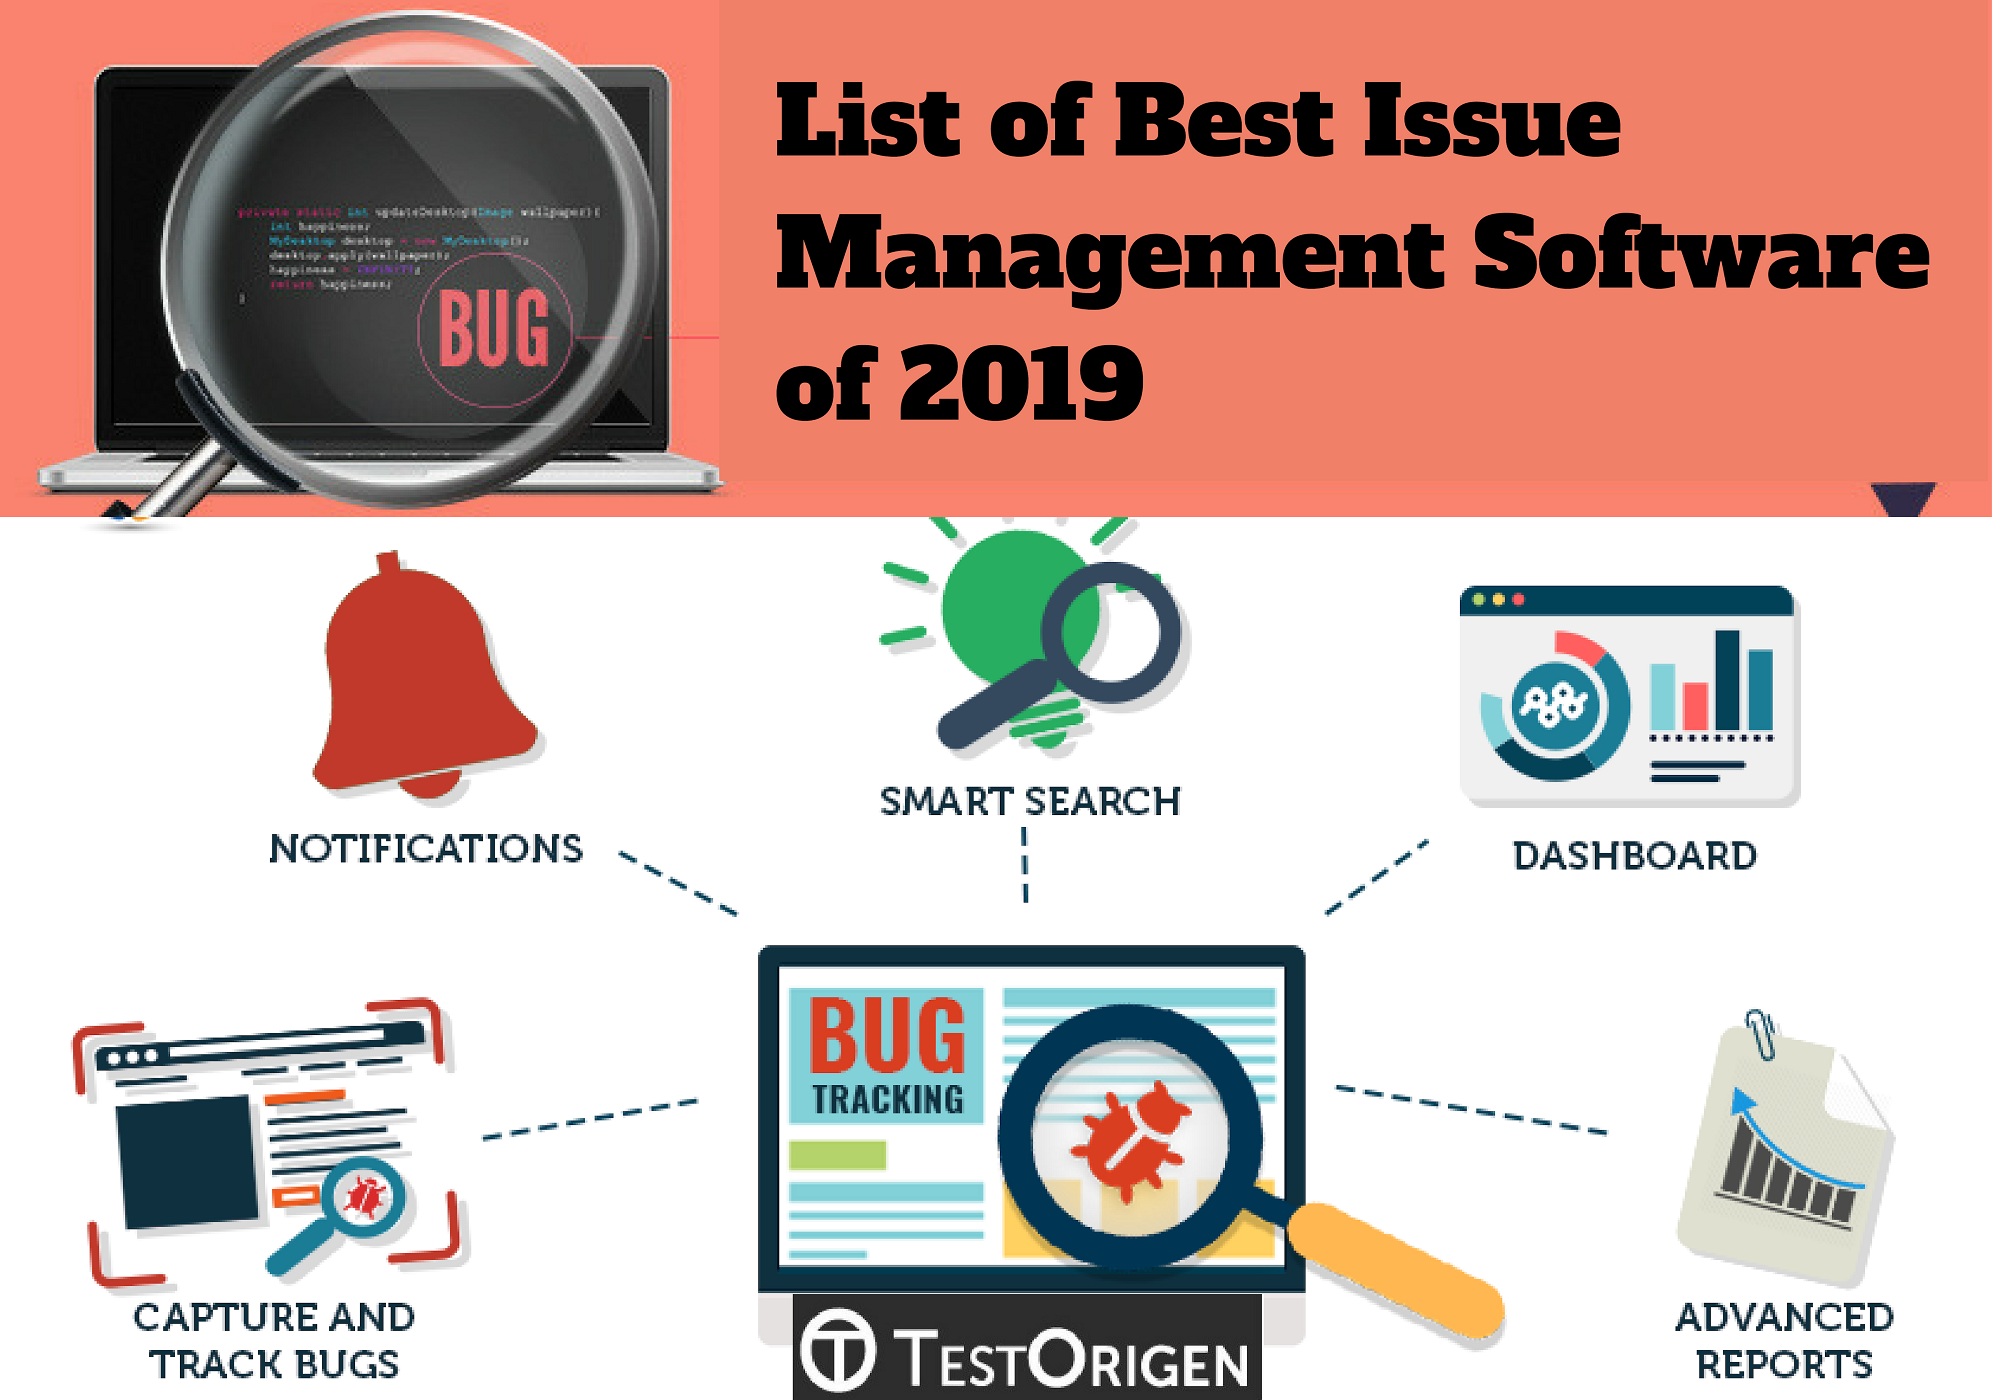 List of Best Issue Management Software of 2019